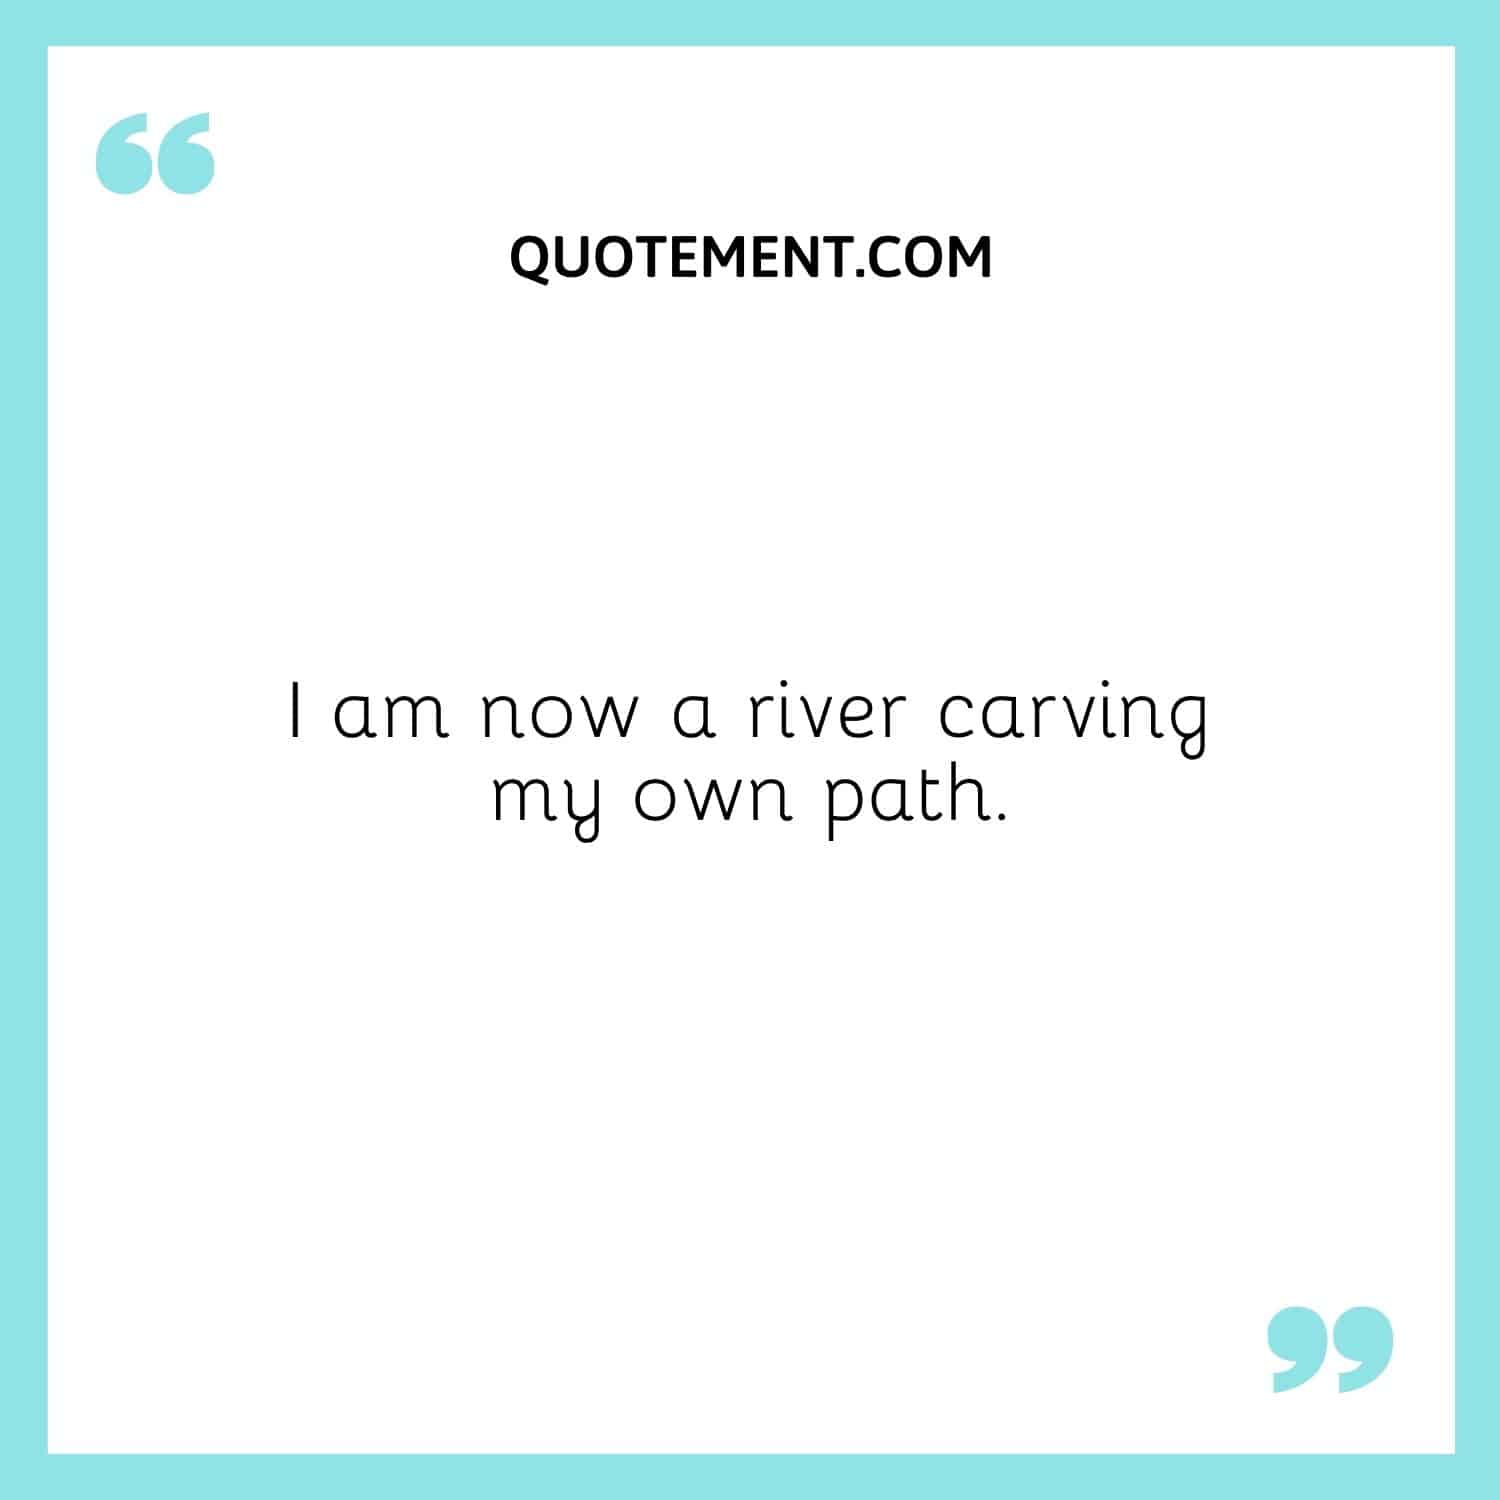 I am now a river carving my own path.